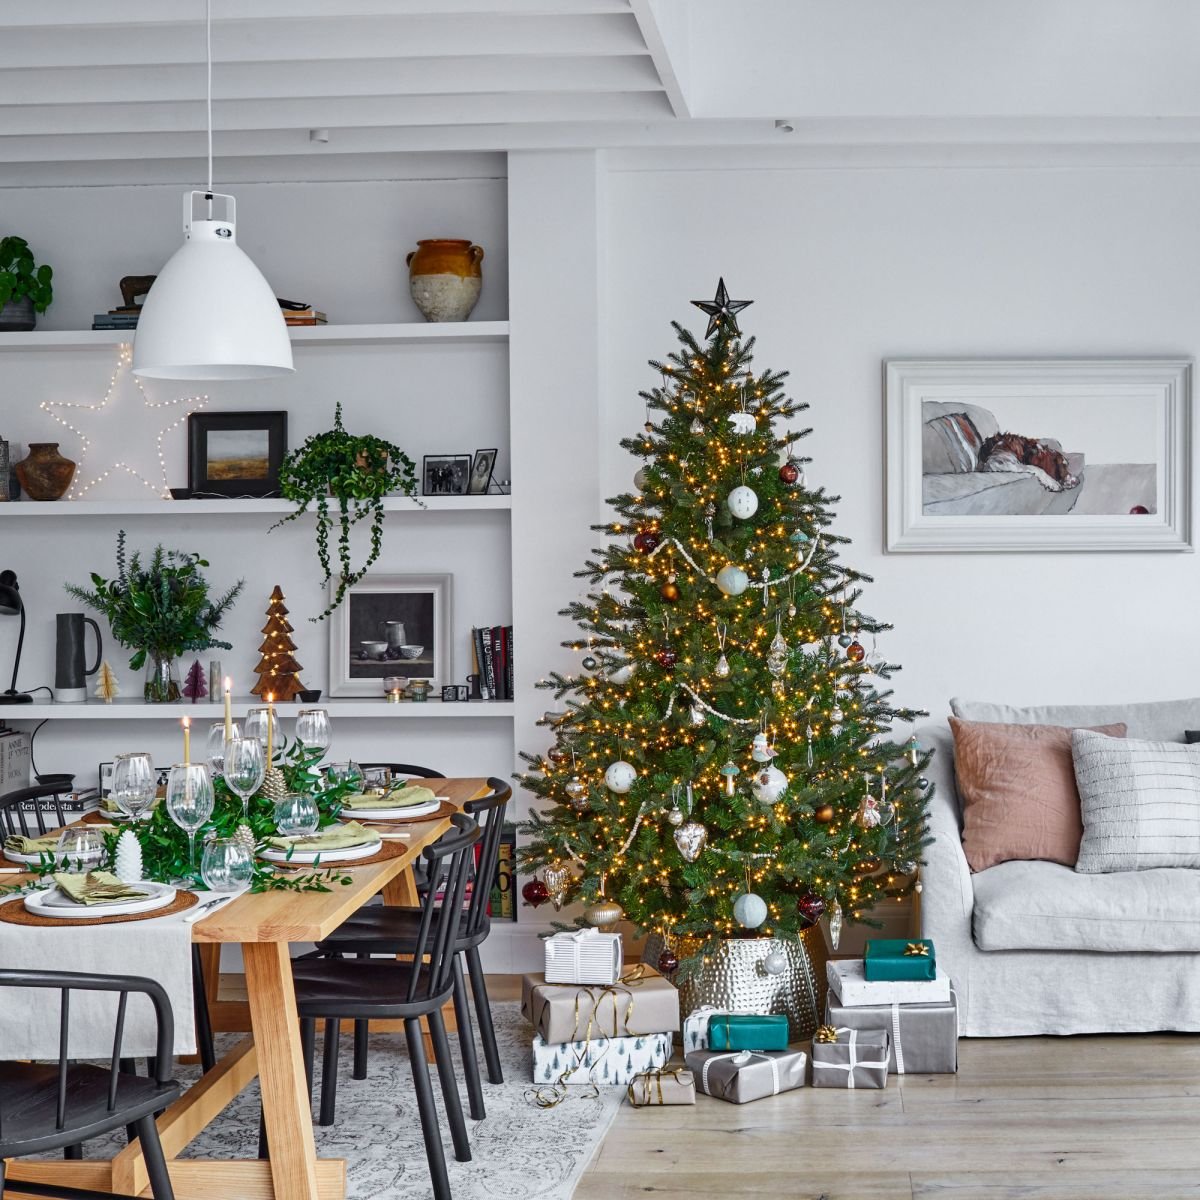 Genius Christmas Decor Hacks That Will Transform Your Home For Less